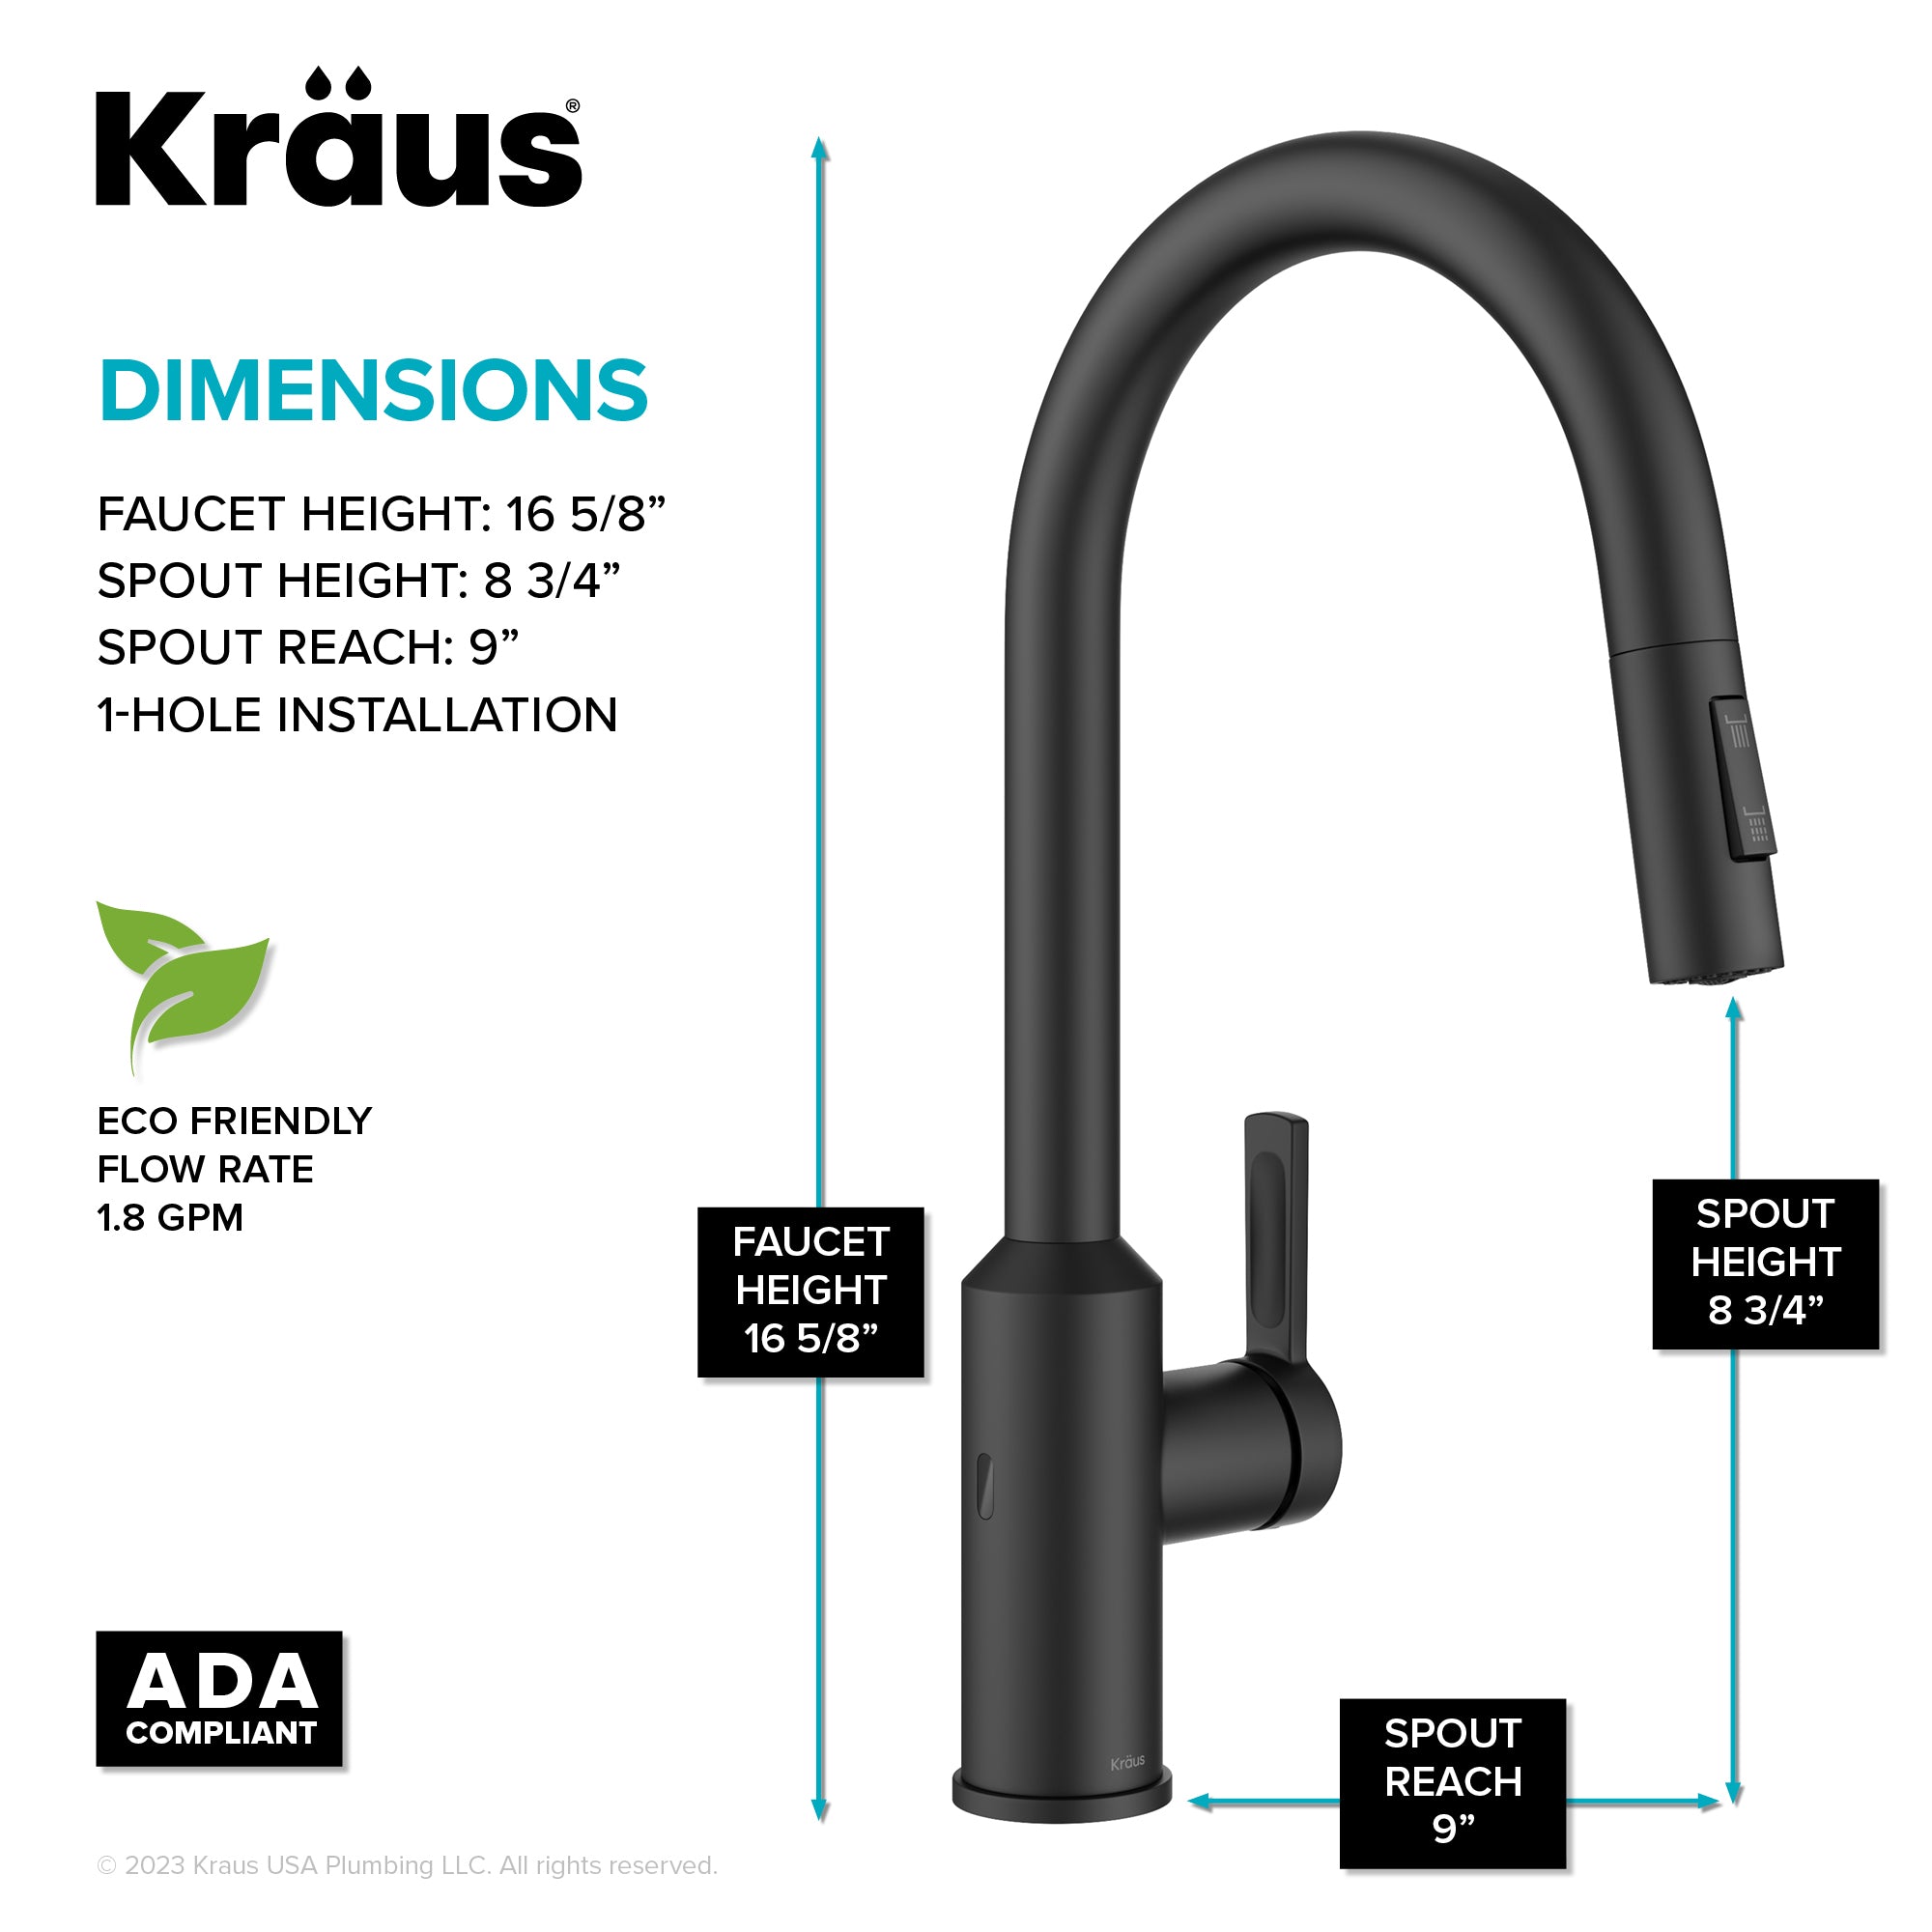 KRAUS Oletto Touchless Pull-Down Kitchen Faucet in Matte Black